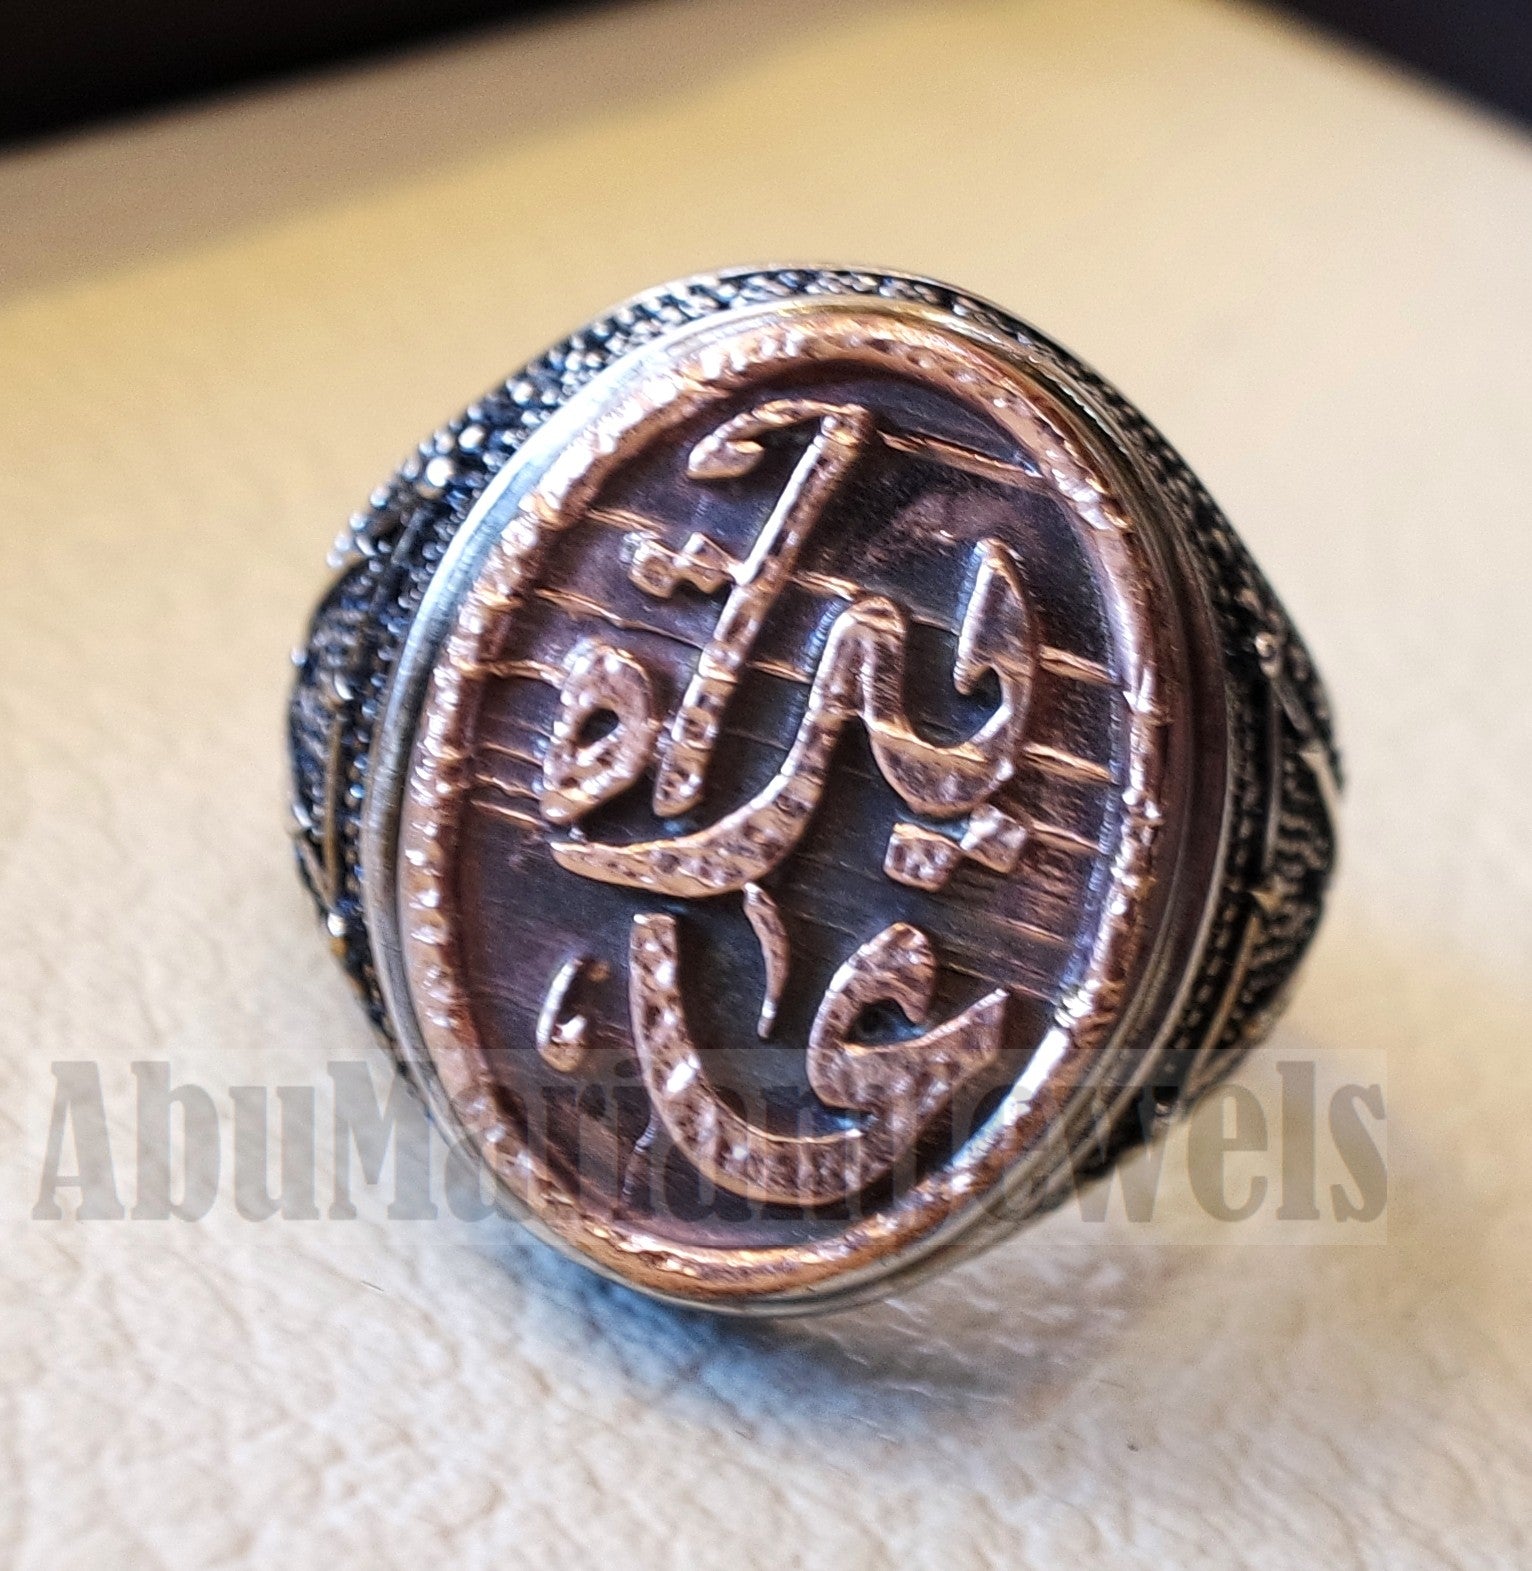 Customized Arabic calligraphy names ring personalized antique jewelry style sterling silver 925 and bronze any size TSB1006 خاتم اسم تفصيل